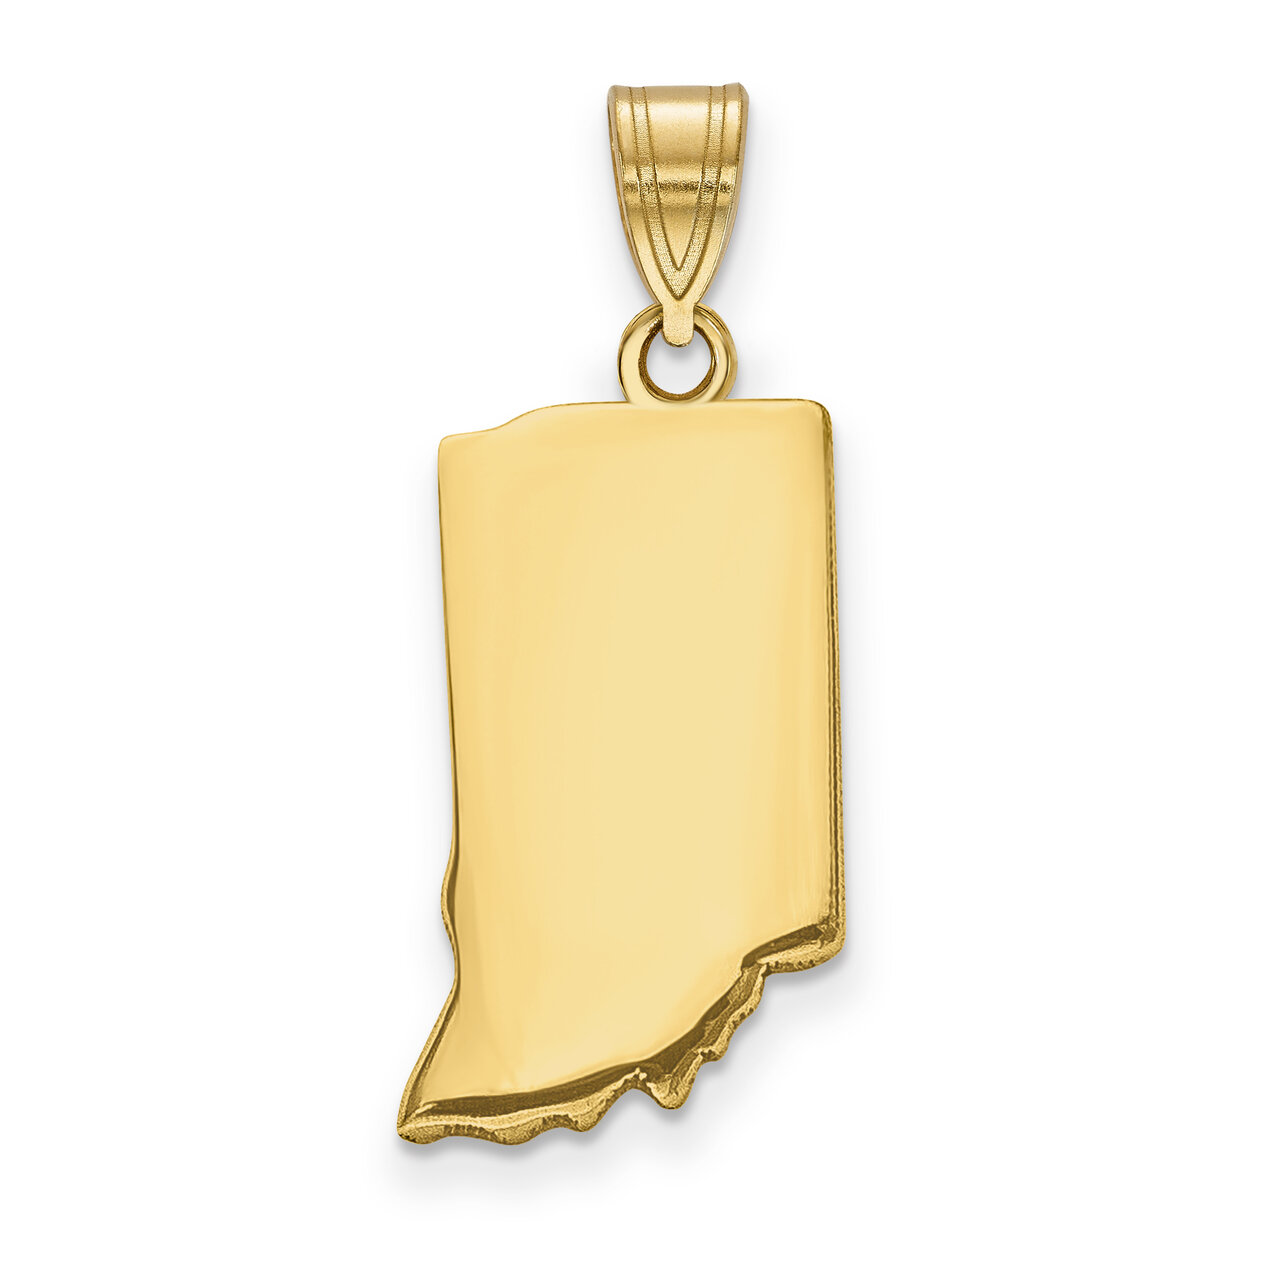 Indiana State Pendant Charm Gold-plated on Silver Engravable XNA707GP-IN